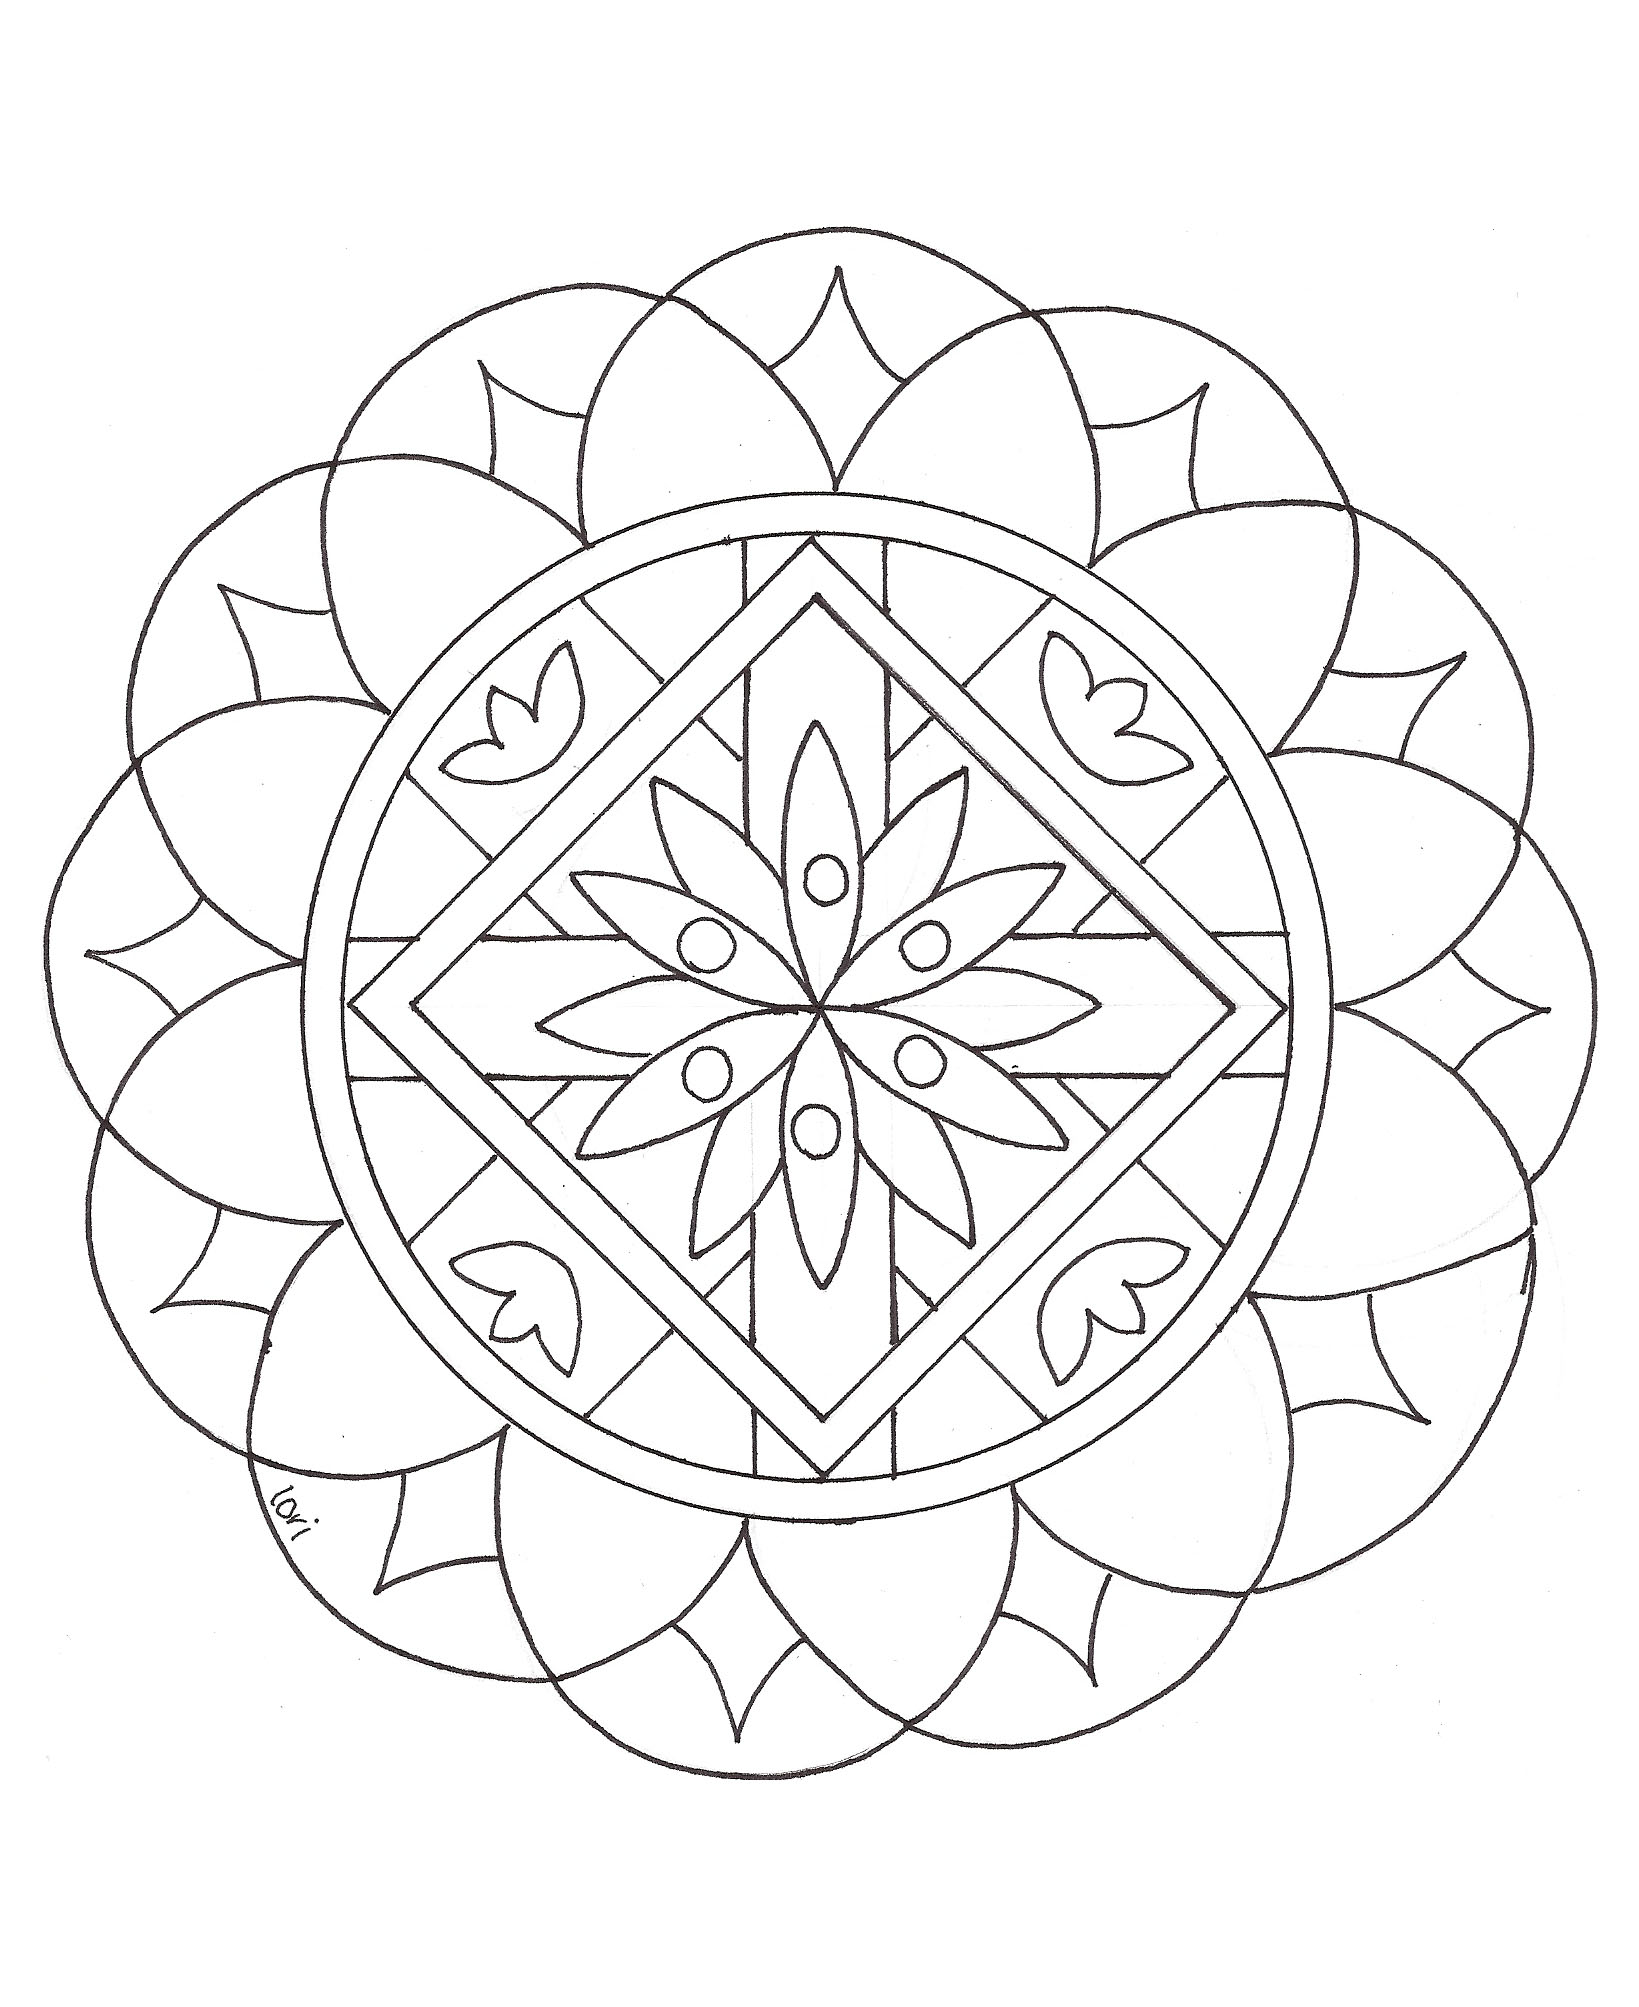 Simple mandala 2 M&alas Coloring pages for kids to print & color